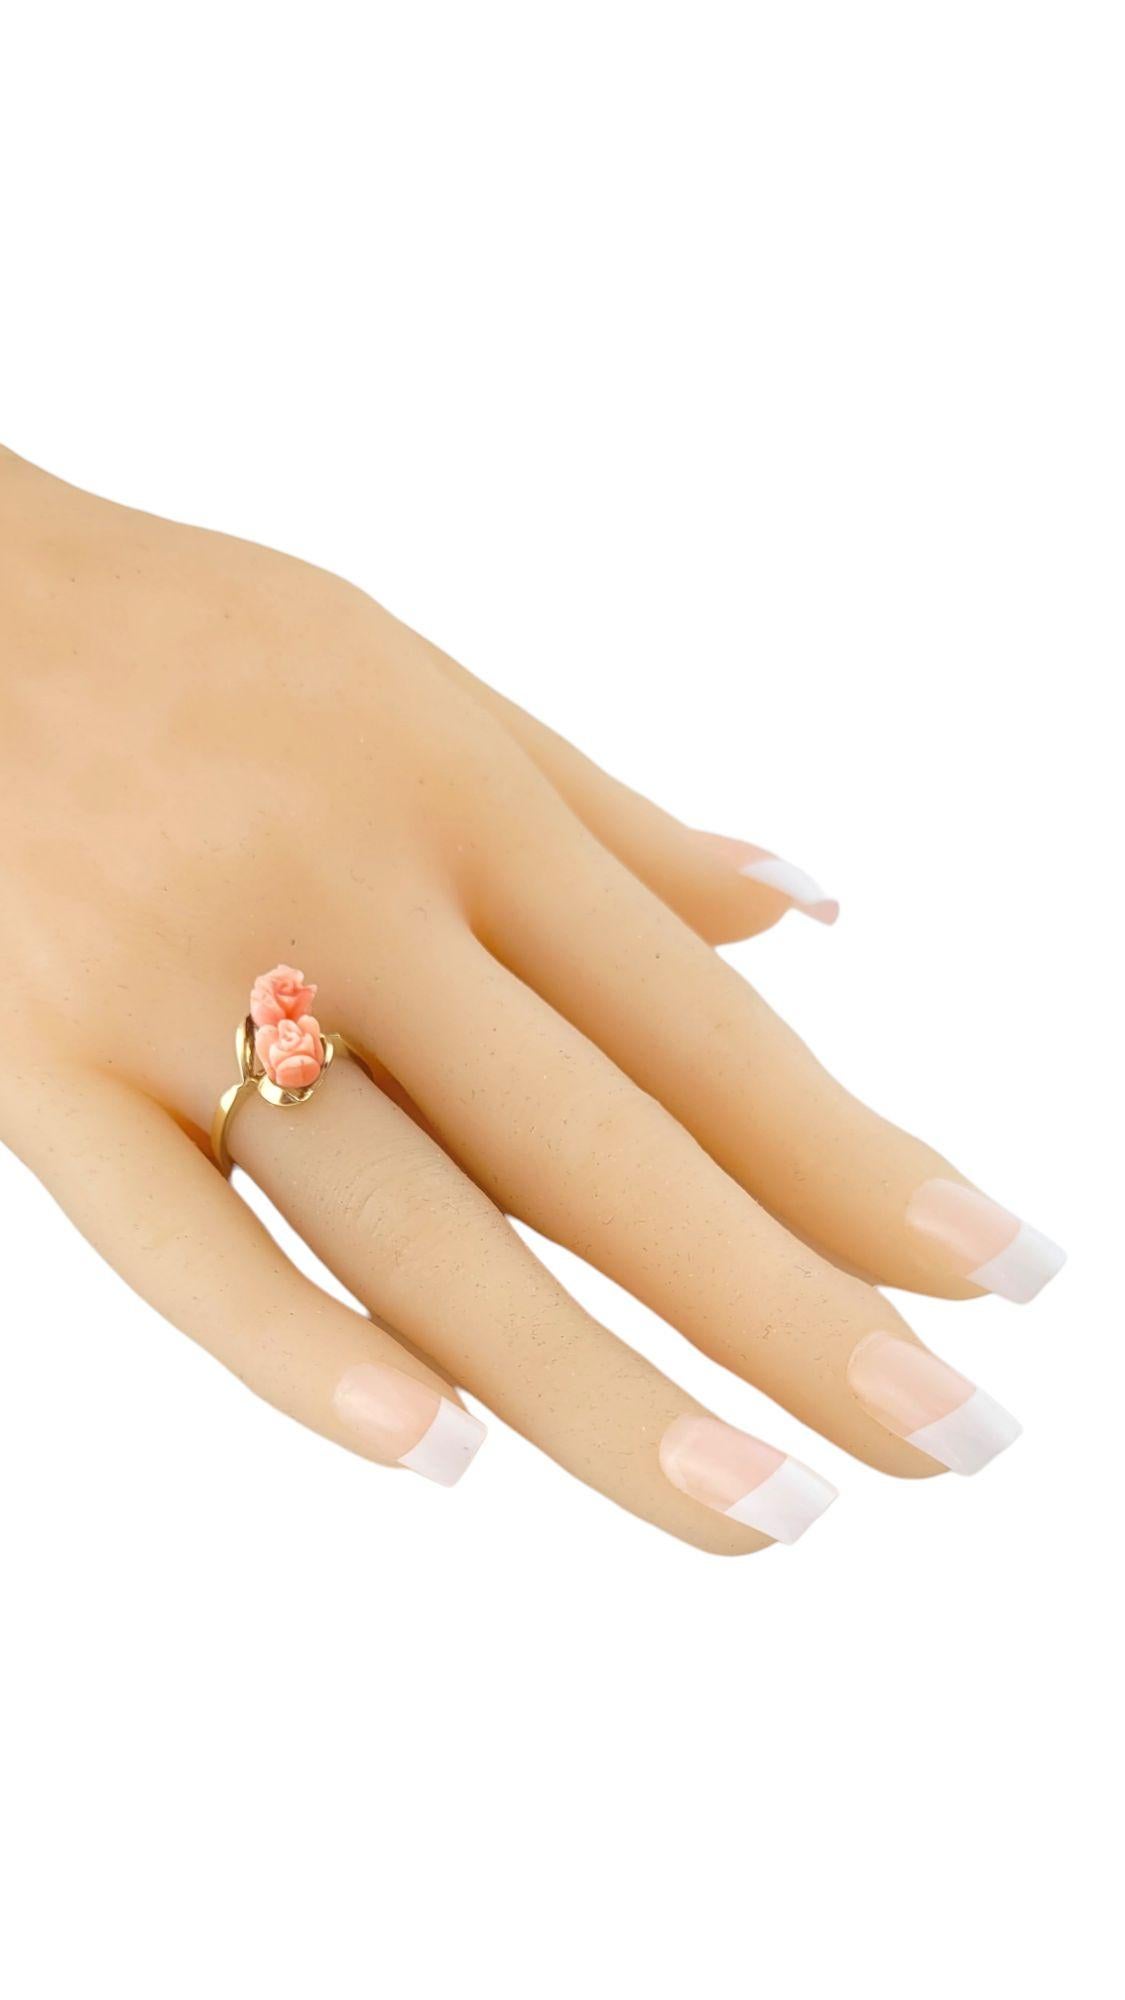 This gorgeous 10K gold ring features a beautifully detailed coral rose on top!

Ring size: 6.5

Shank: 2mm

Front: 13mm X 9.6mm X 9mm

Weight: 2.95 g/ 1.9 dwt

Hallmark: 10K

Very good condition, professionally polished.

Will come packaged in a